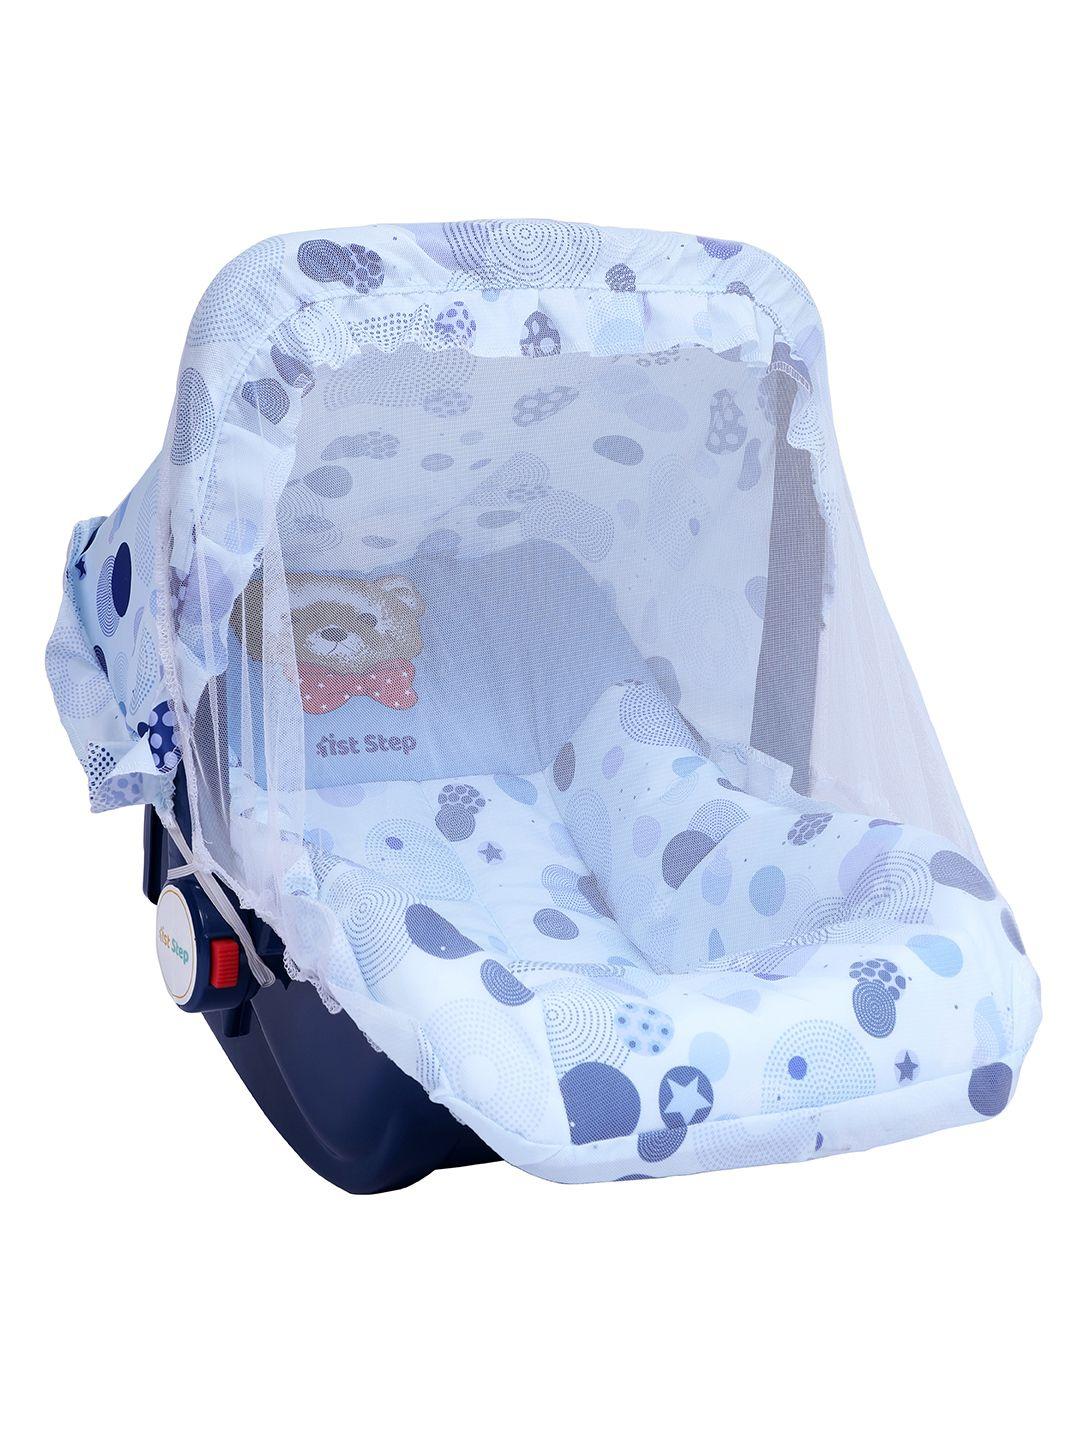 1st step infant blue printed carry cot